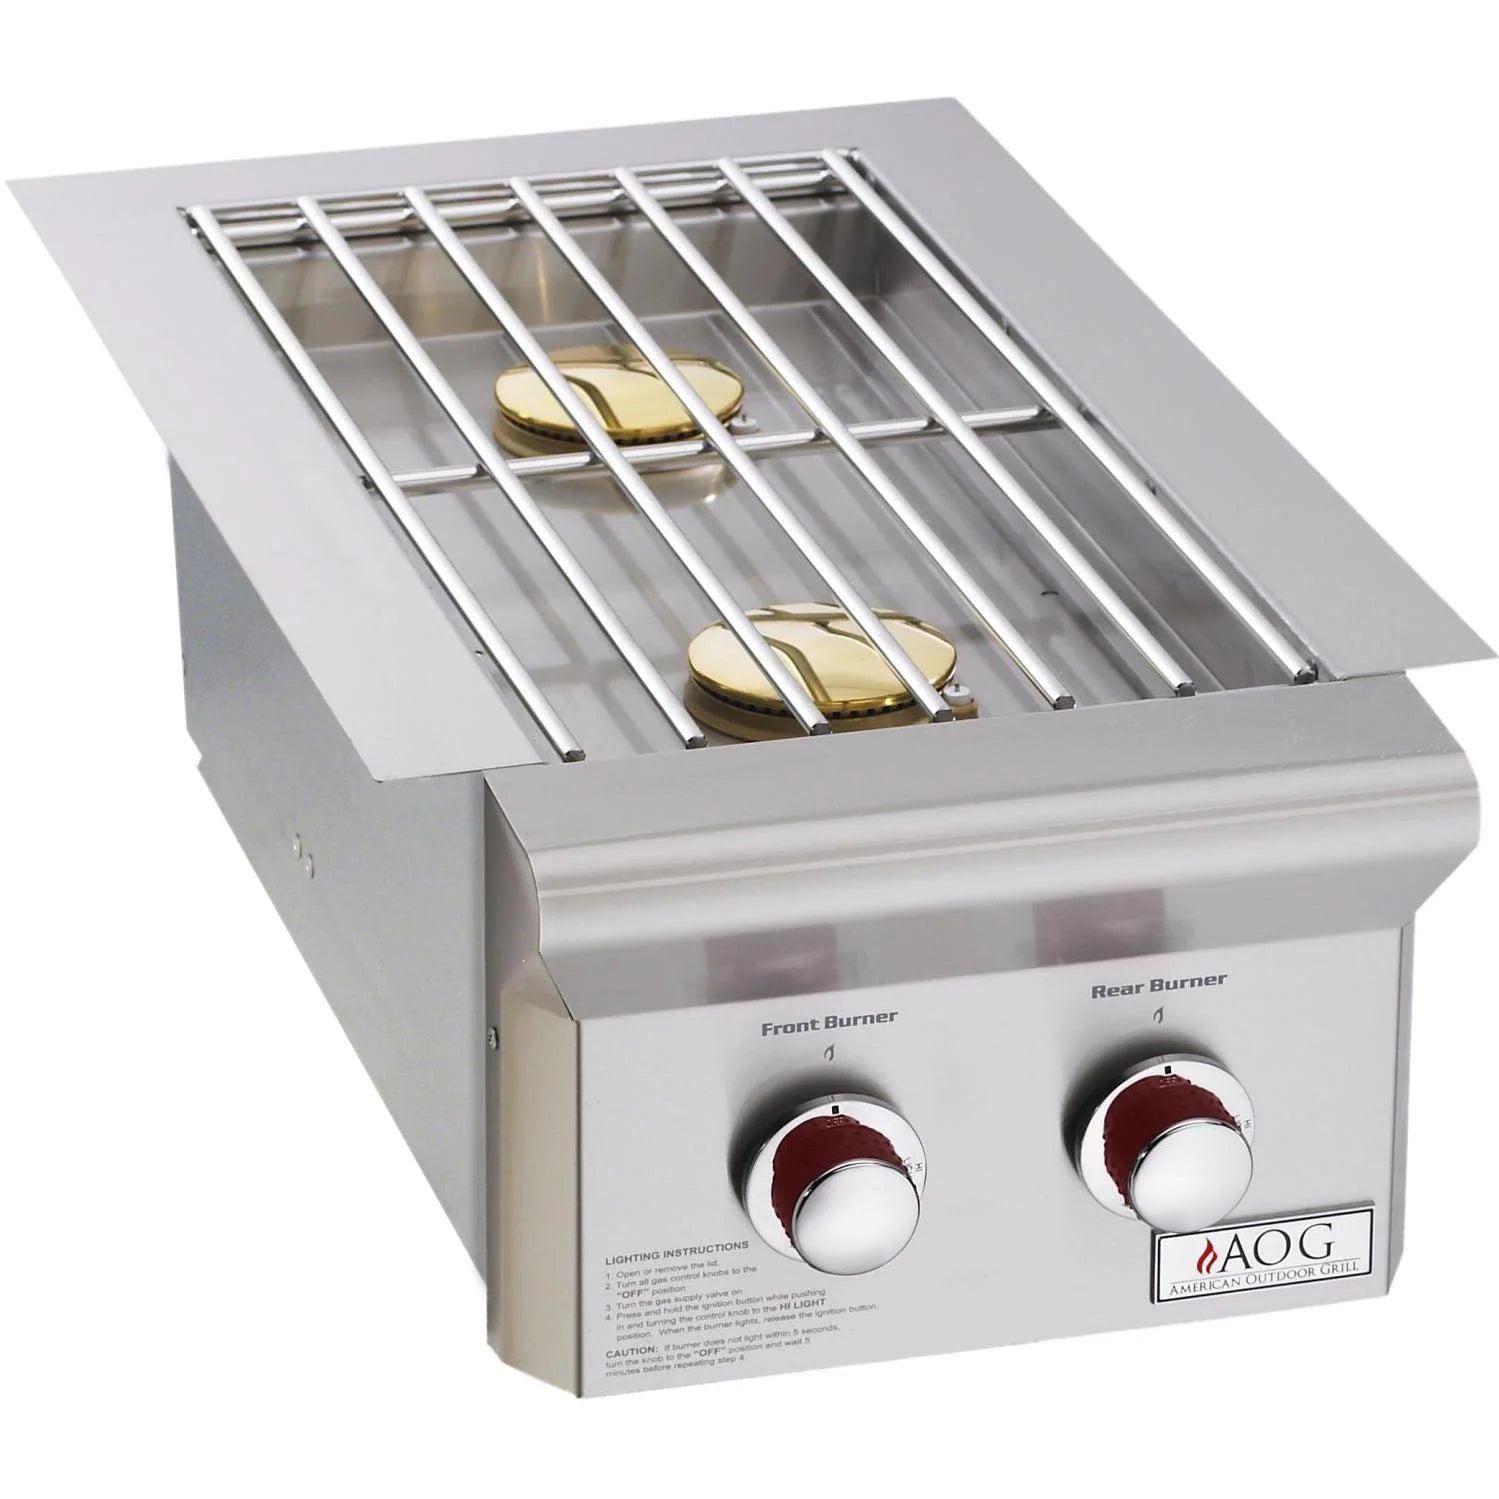 American Outdoor Grill T Series Built-in Double Side Burner - 3282T - Grills N More